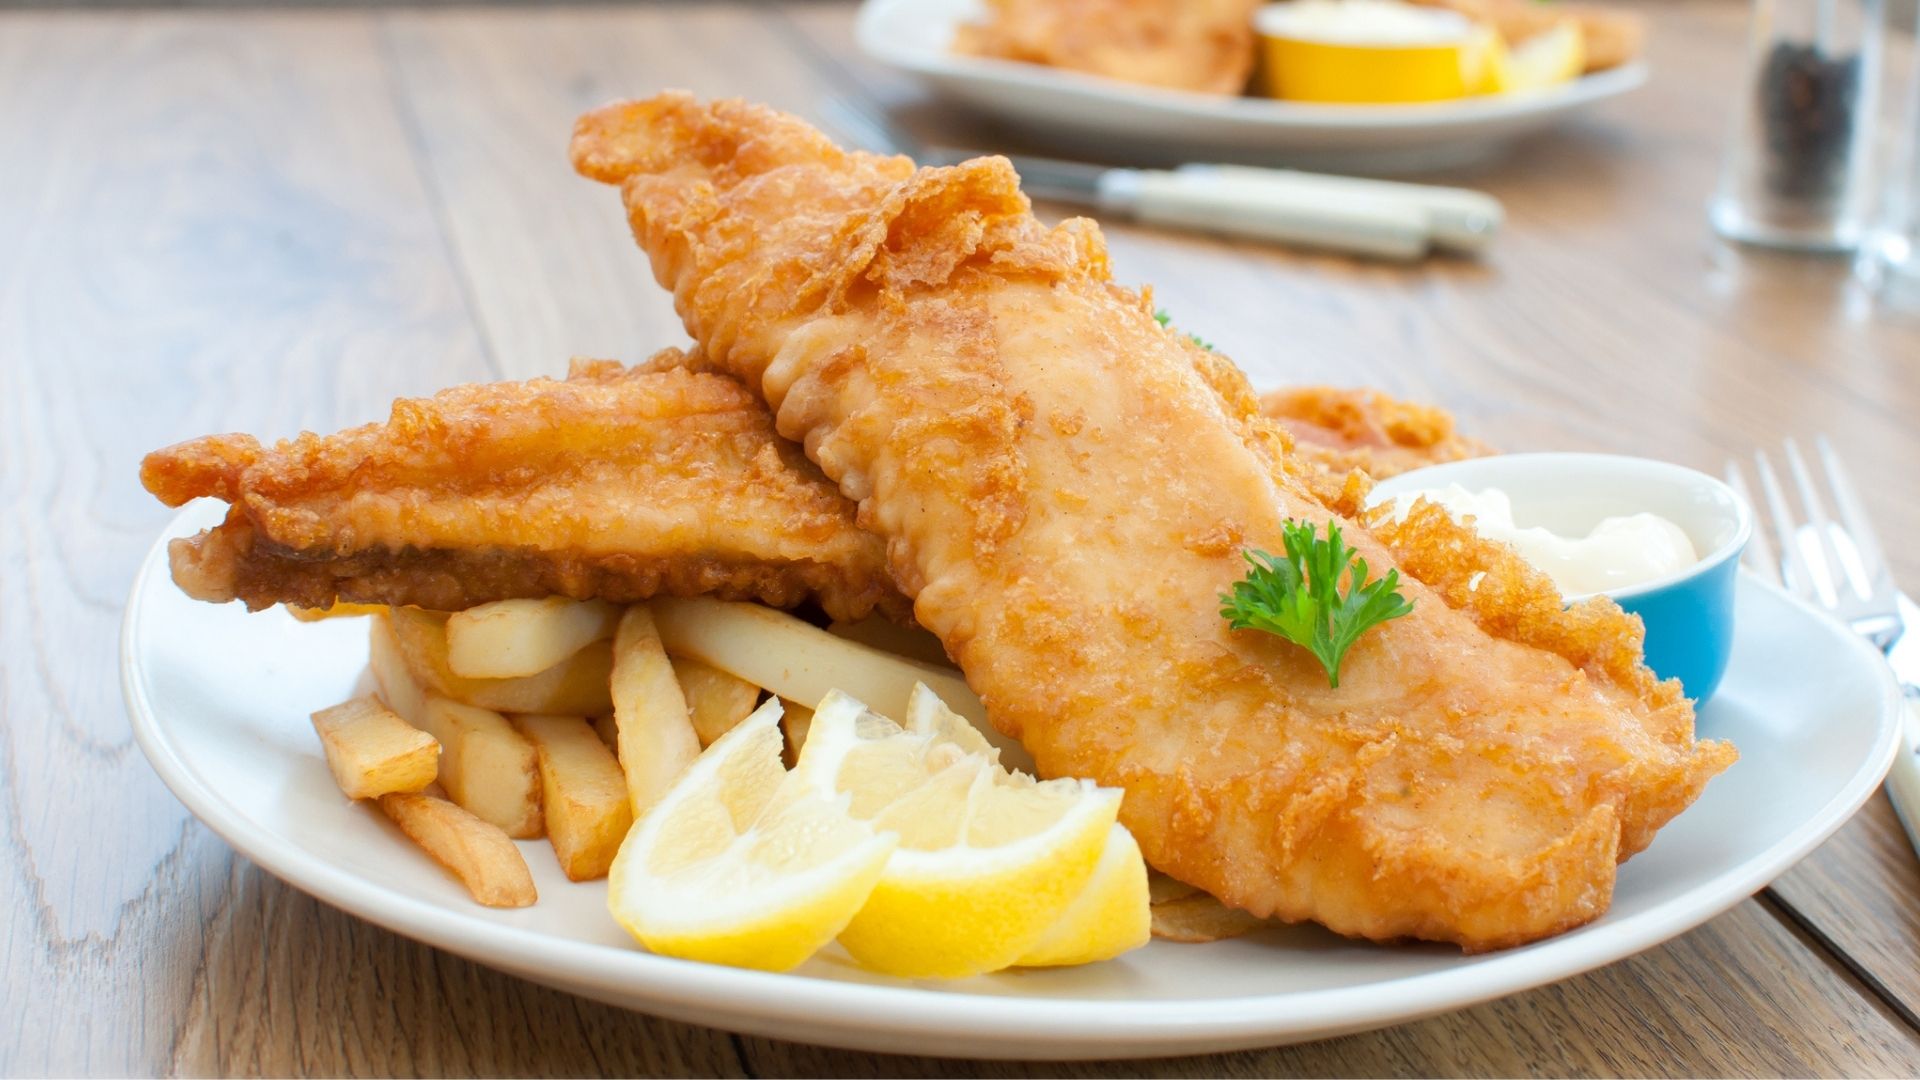 Is fry good for fish?